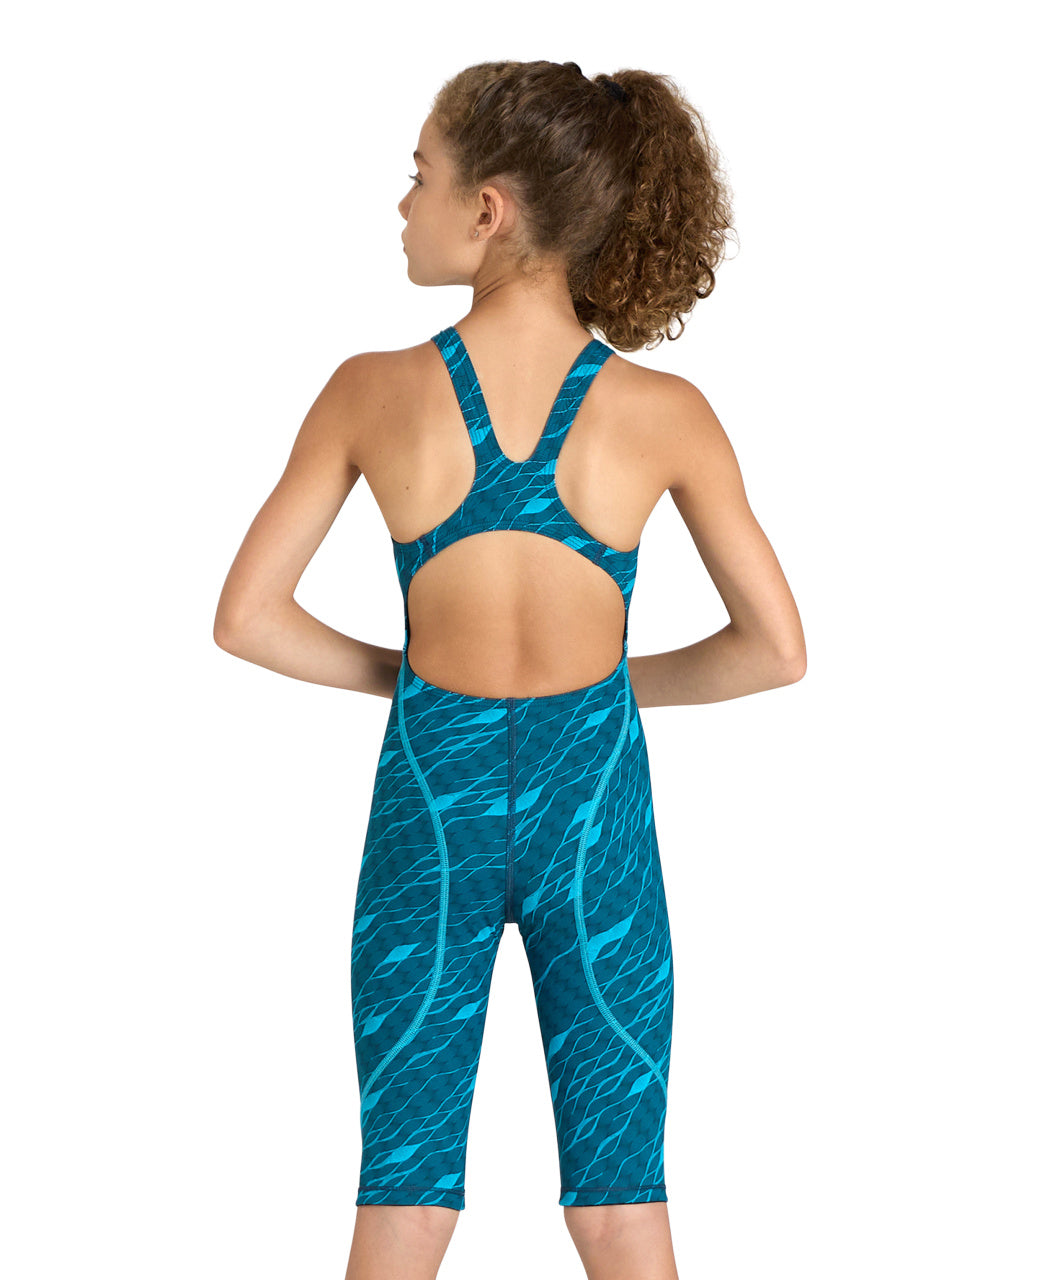 GIRLS POWERSKIN ST NEXT OPEN BACK (LIMITED EDITION) JUNIOR - CLEAN-SEA-BLUE